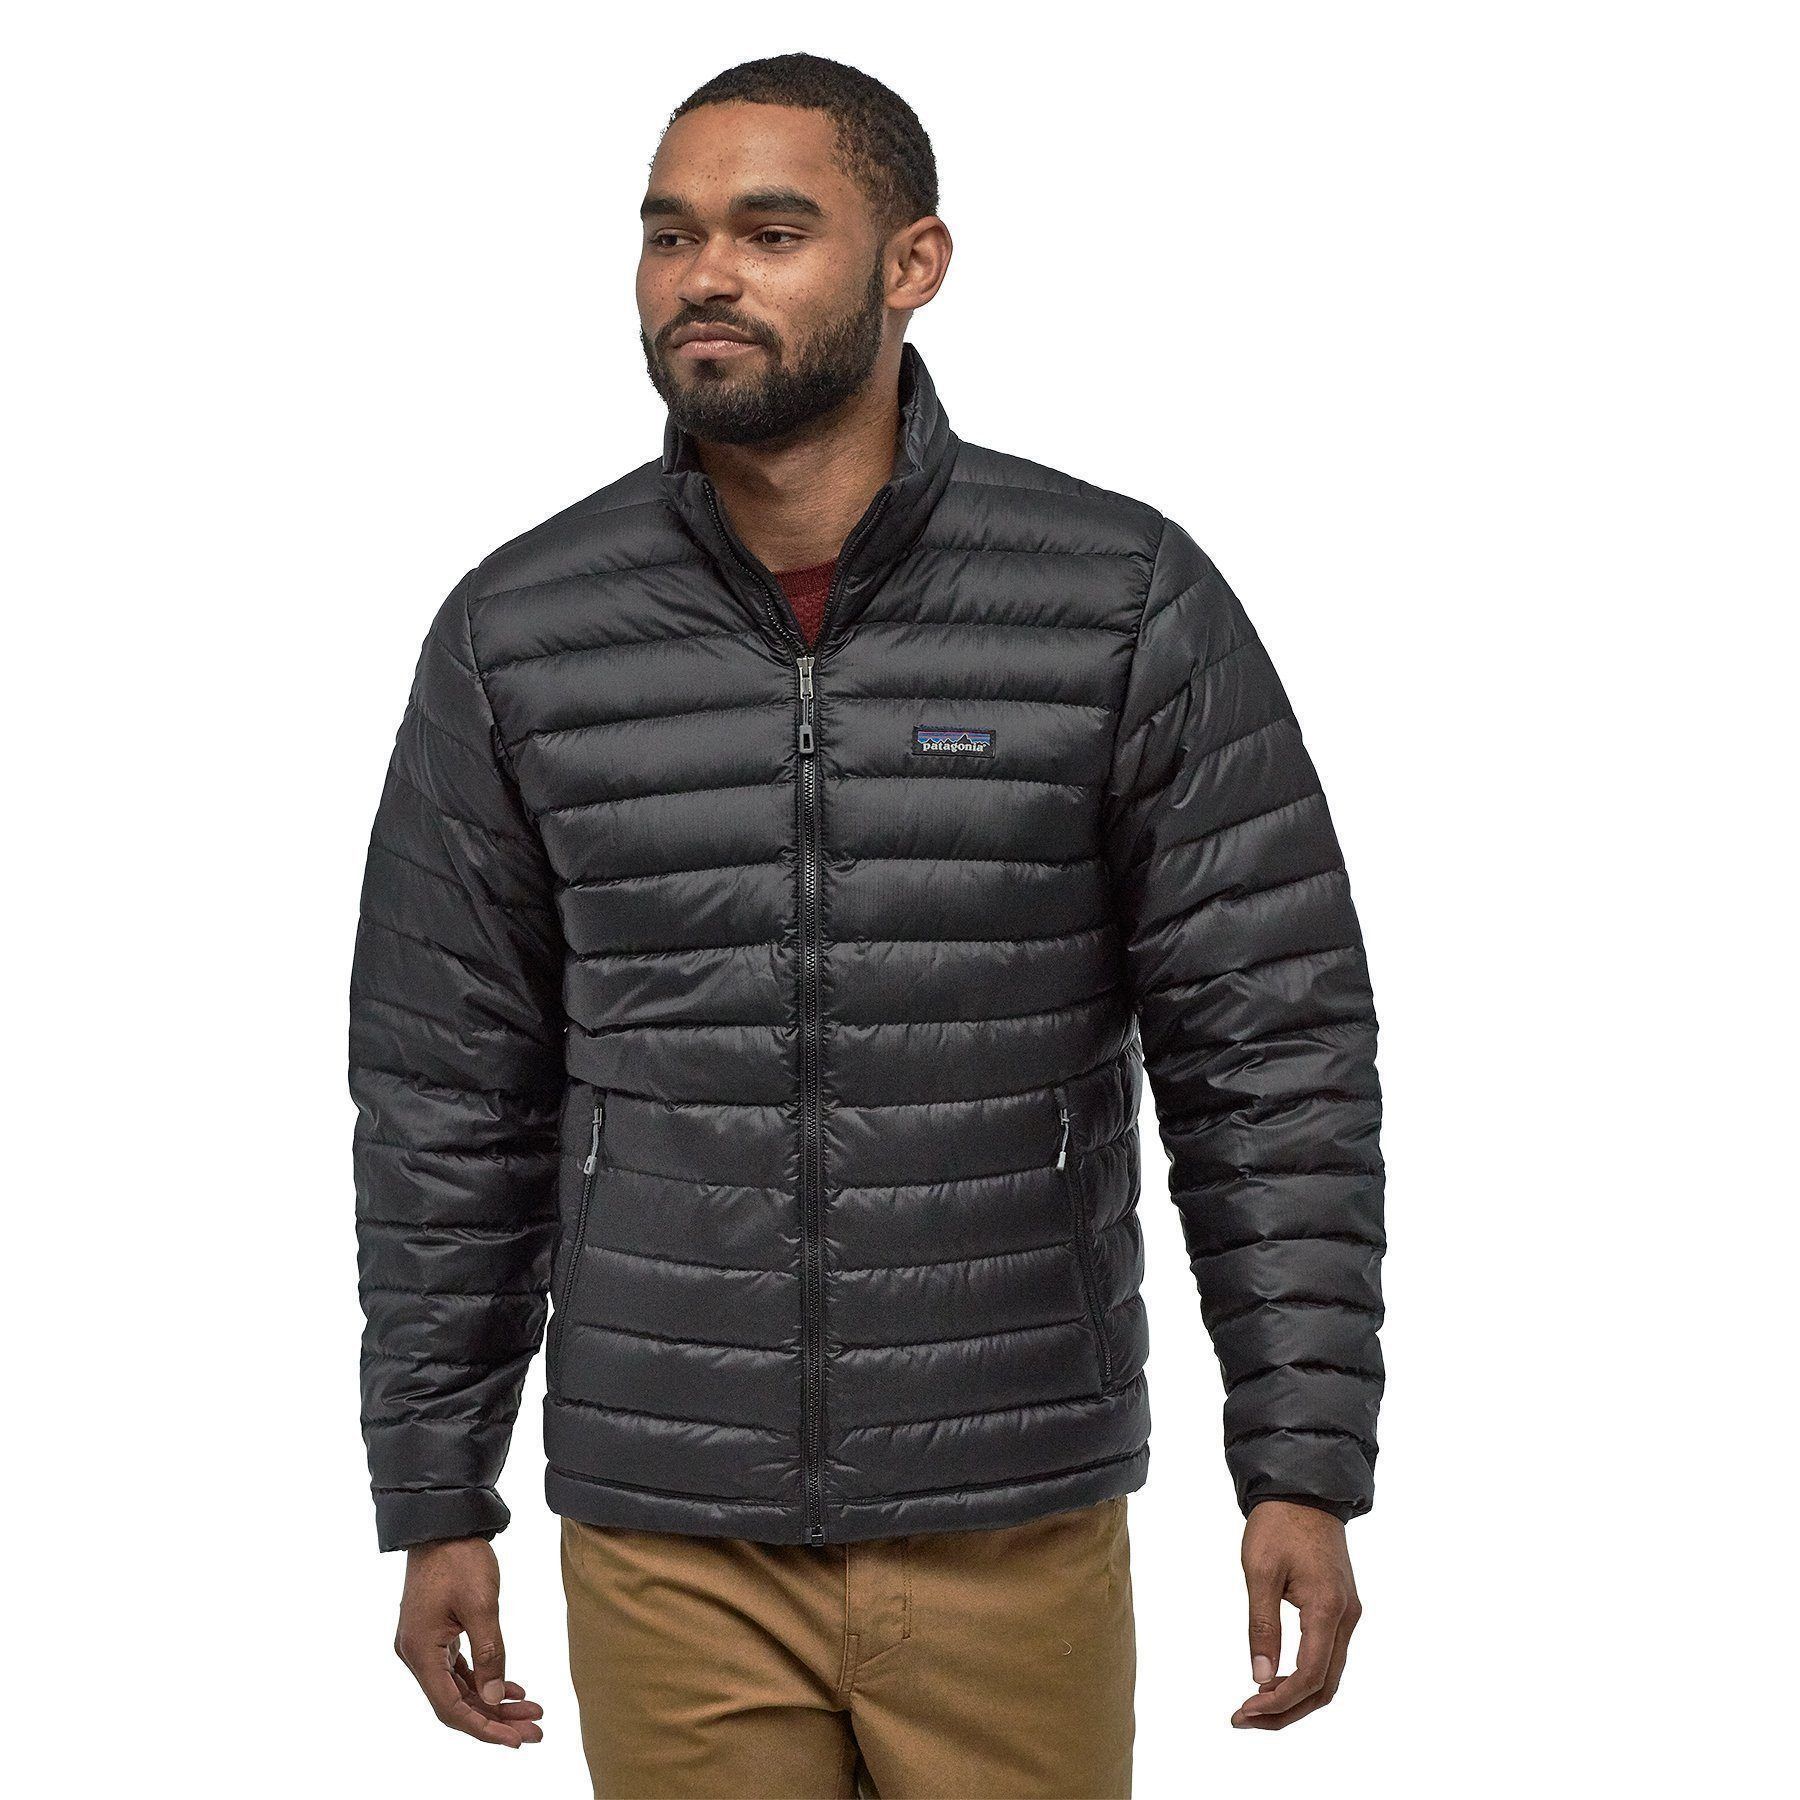 Patagonia Men's Down Sweater Jacket - Ethical down/Recycled polyester, Black / S